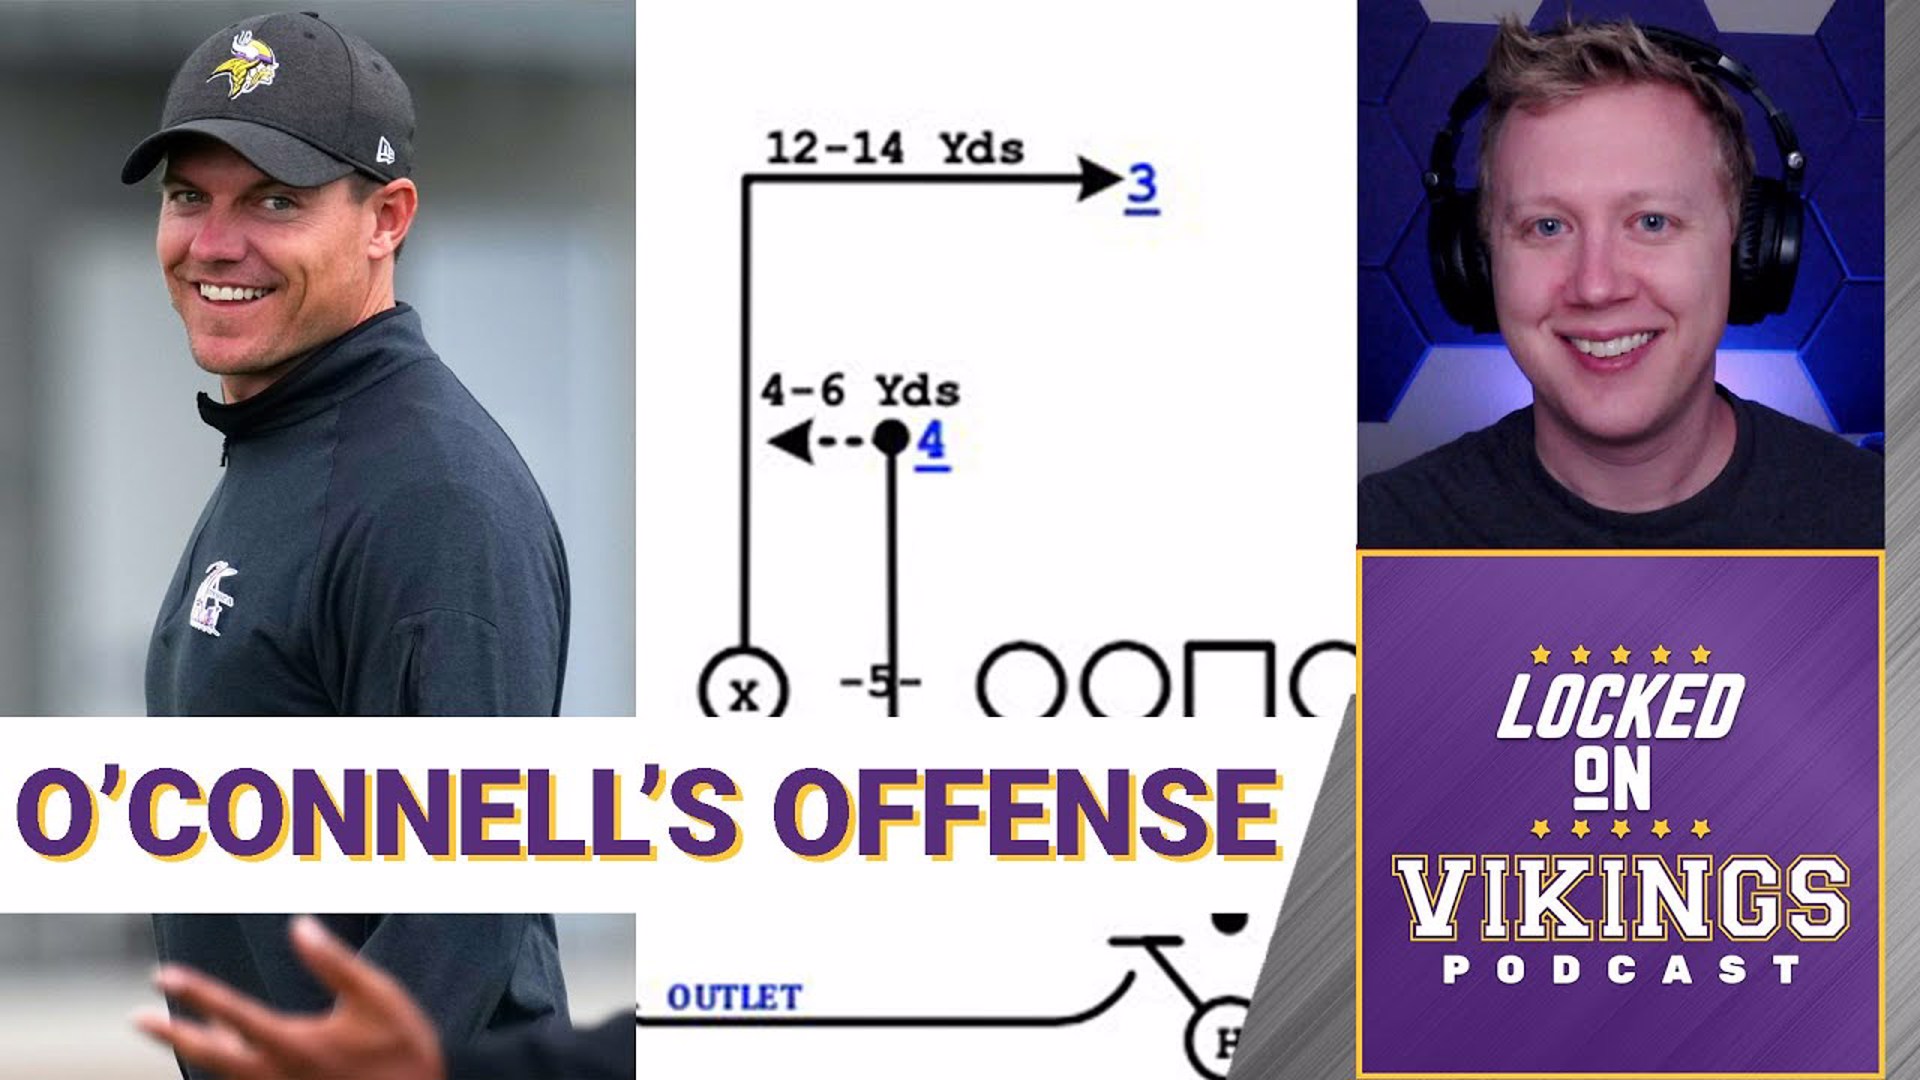 Minnesota Vikings Training Camp Revealed Kevin O'Connell's Offense